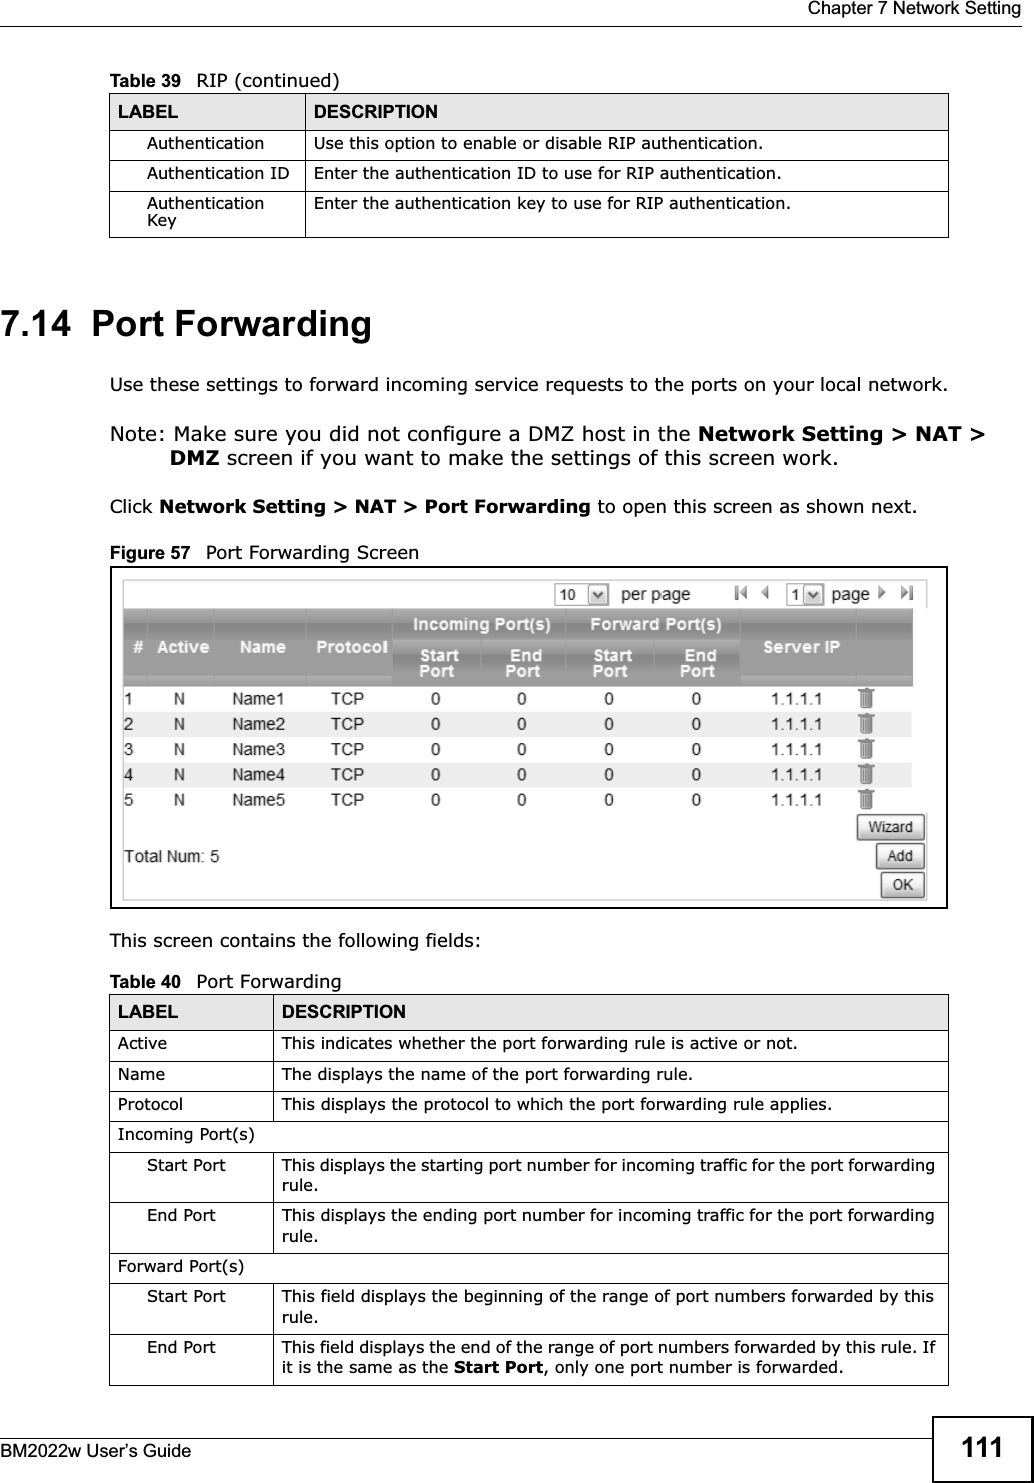  Chapter 7 Network SettingBM2022w User’s Guide 1117.14  Port ForwardingUse these settings to forward incoming service requests to the ports on your local network.Note: Make sure you did not configure a DMZ host in the Network Setting &gt; NAT &gt; DMZ screen if you want to make the settings of this screen work.Click Network Setting &gt; NAT &gt; Port Forwarding to open this screen as shown next.Figure 57   Port Forwarding ScreenThis screen contains the following fields:Authentication Use this option to enable or disable RIP authentication.Authentication ID Enter the authentication ID to use for RIP authentication.Authentication Key Enter the authentication key to use for RIP authentication.Table 39   RIP (continued)LABEL DESCRIPTIONTable 40   Port ForwardingLABEL DESCRIPTIONActive This indicates whether the port forwarding rule is active or not.Name The displays the name of the port forwarding rule.Protocol This displays the protocol to which the port forwarding rule applies.Incoming Port(s)Start Port This displays the starting port number for incoming traffic for the port forwarding rule.End Port This displays the ending port number for incoming traffic for the port forwarding rule.Forward Port(s)Start Port This field displays the beginning of the range of port numbers forwarded by this rule.End Port This field displays the end of the range of port numbers forwarded by this rule. If it is the same as the Start Port, only one port number is forwarded.